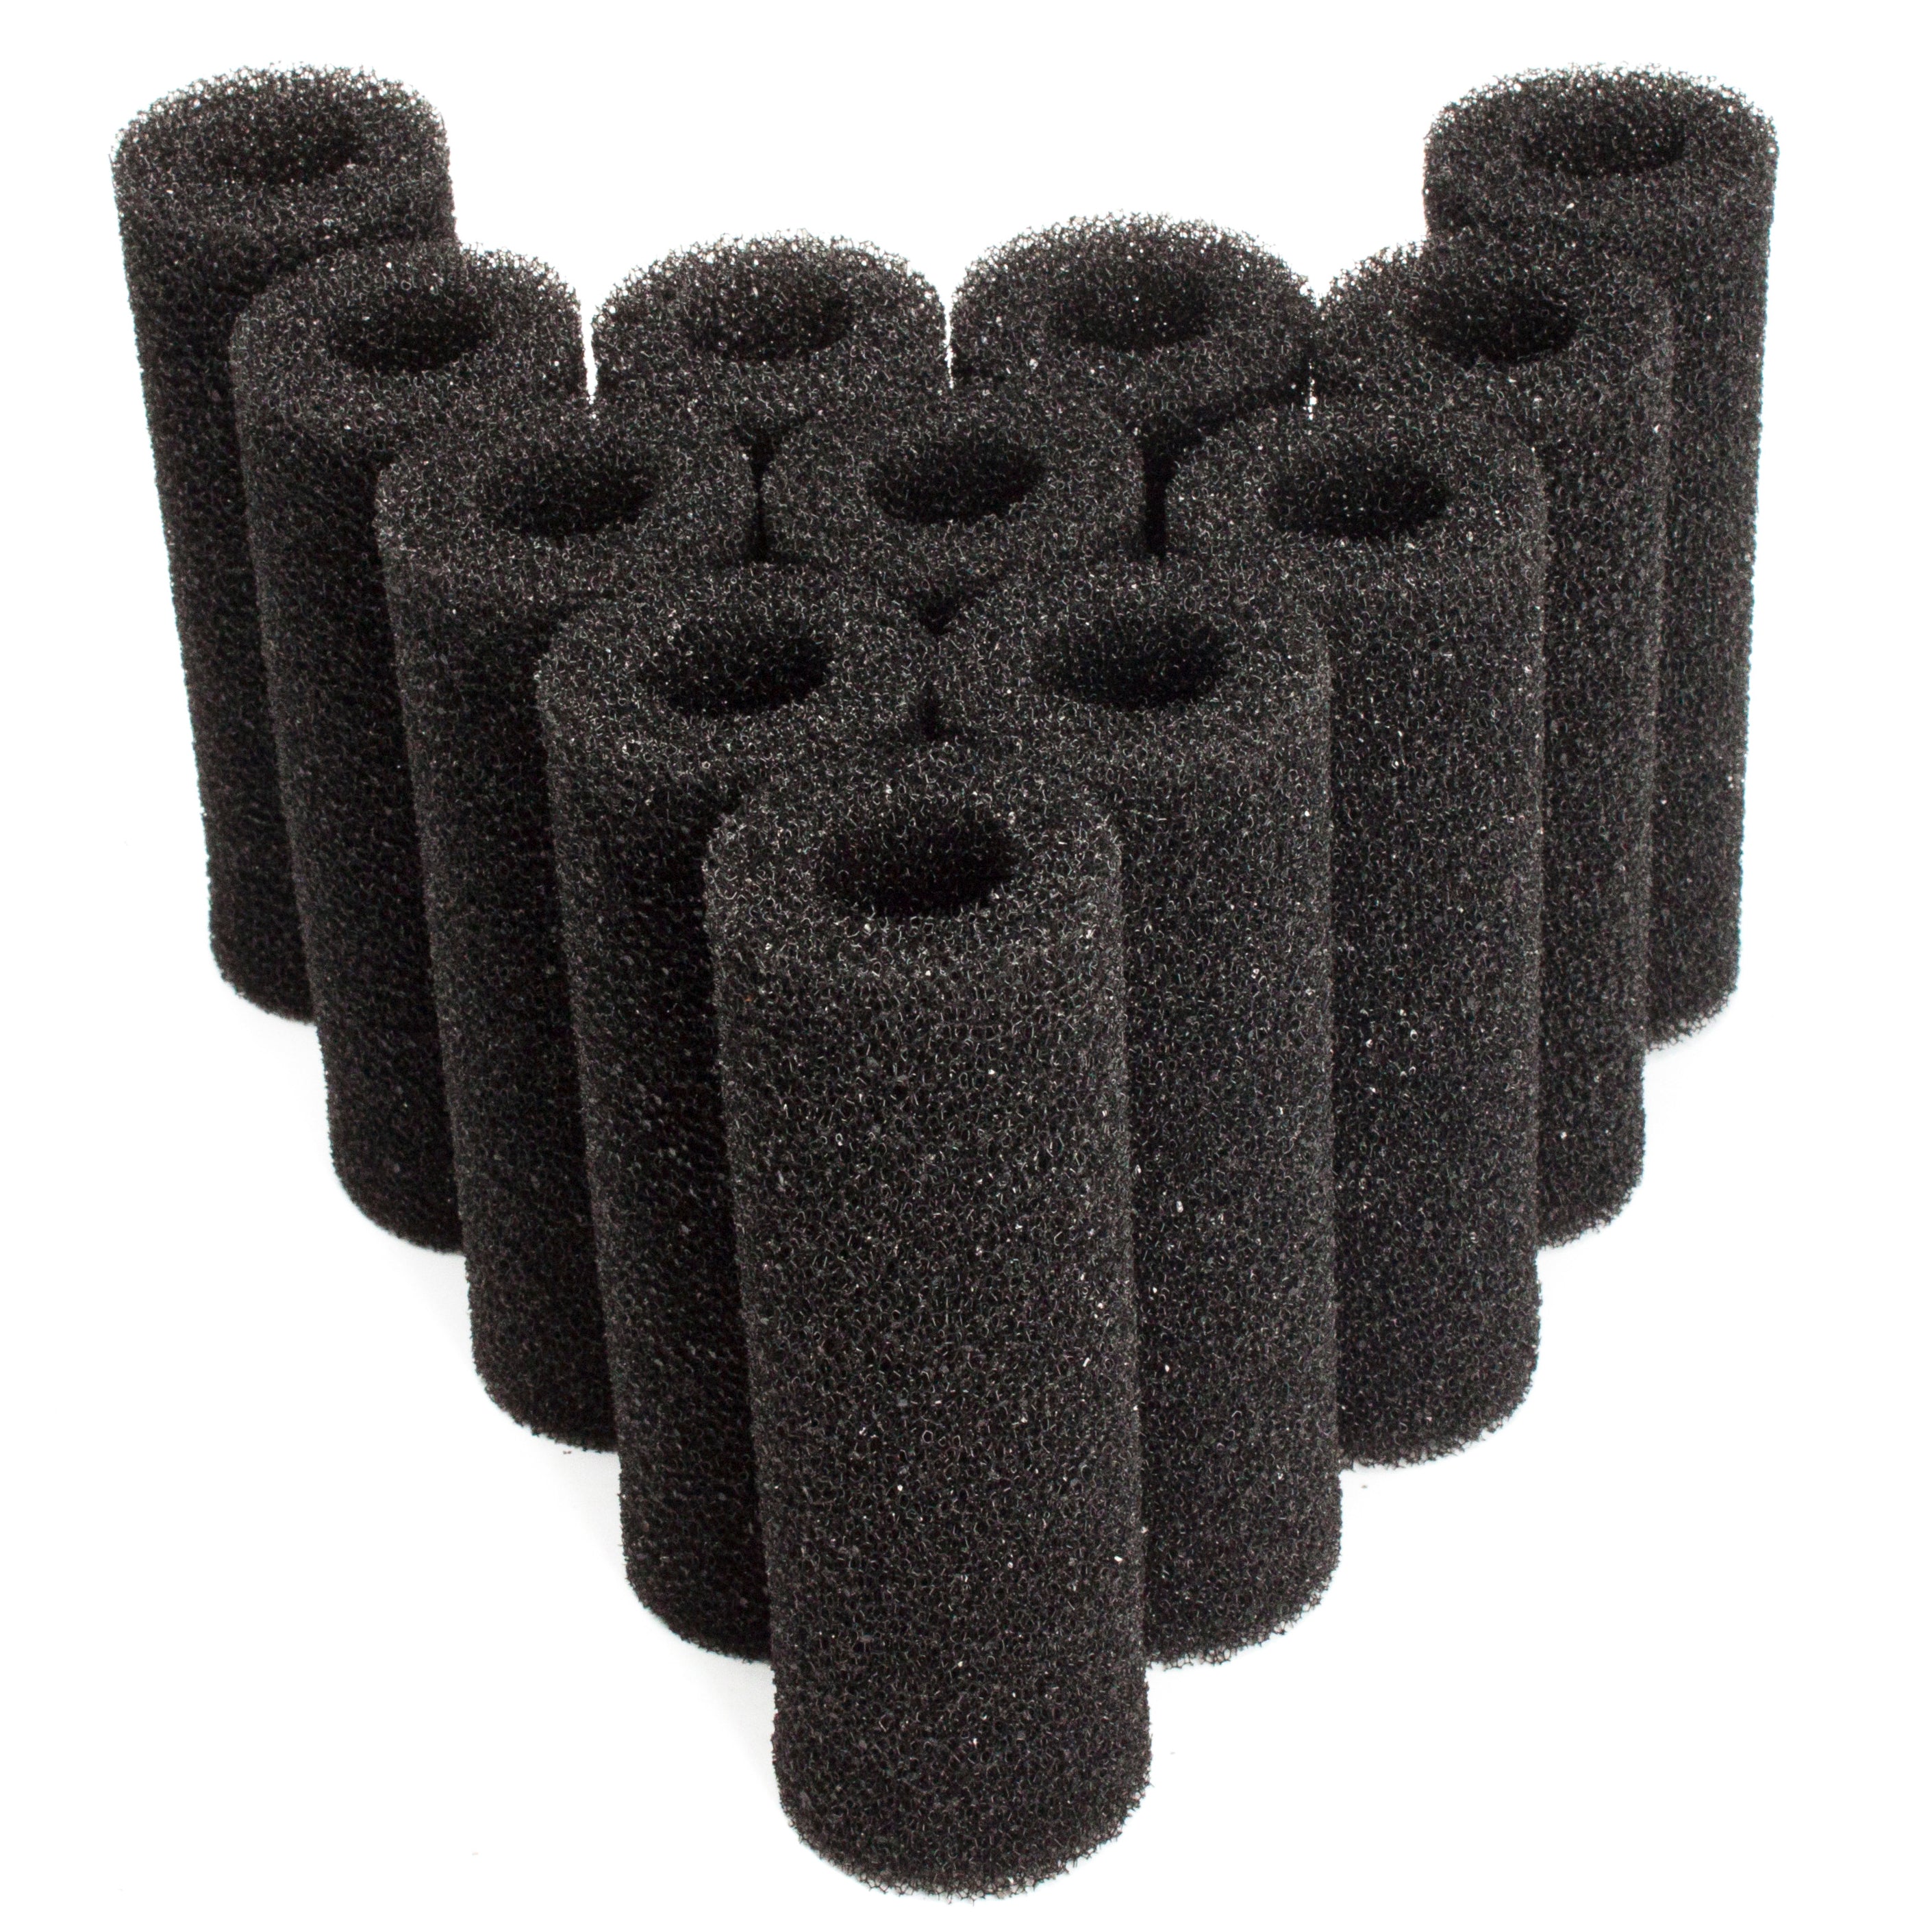 LTWHOME AEO19050 Round Small Filter Sponge Fit for AEO19050 Zoo Med's 501 External Filter (Pack of 12)